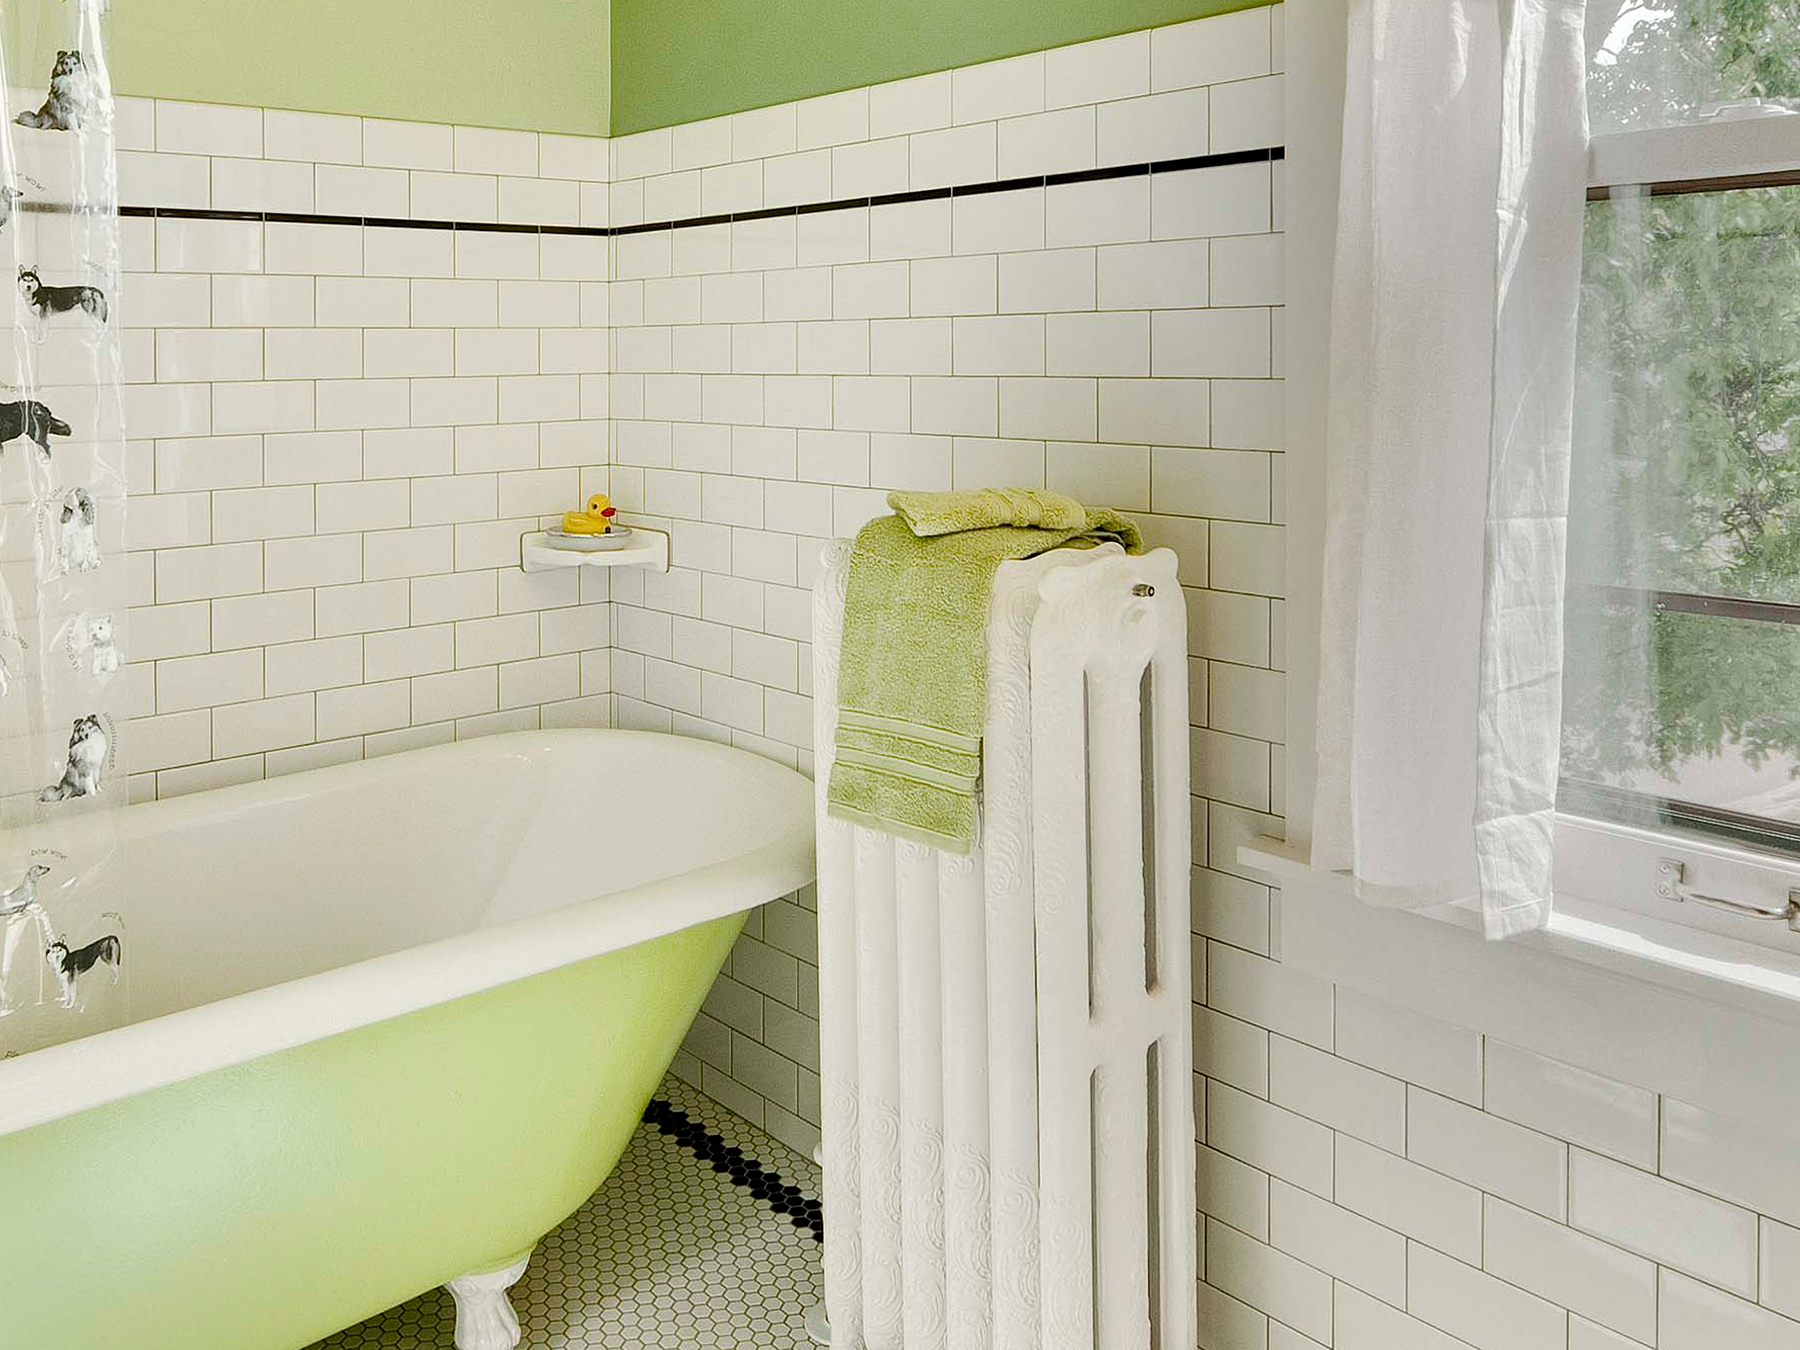 A full color after remodel image of a bathroom with white tile walls, a painted claw foot tub with a white painted radiator